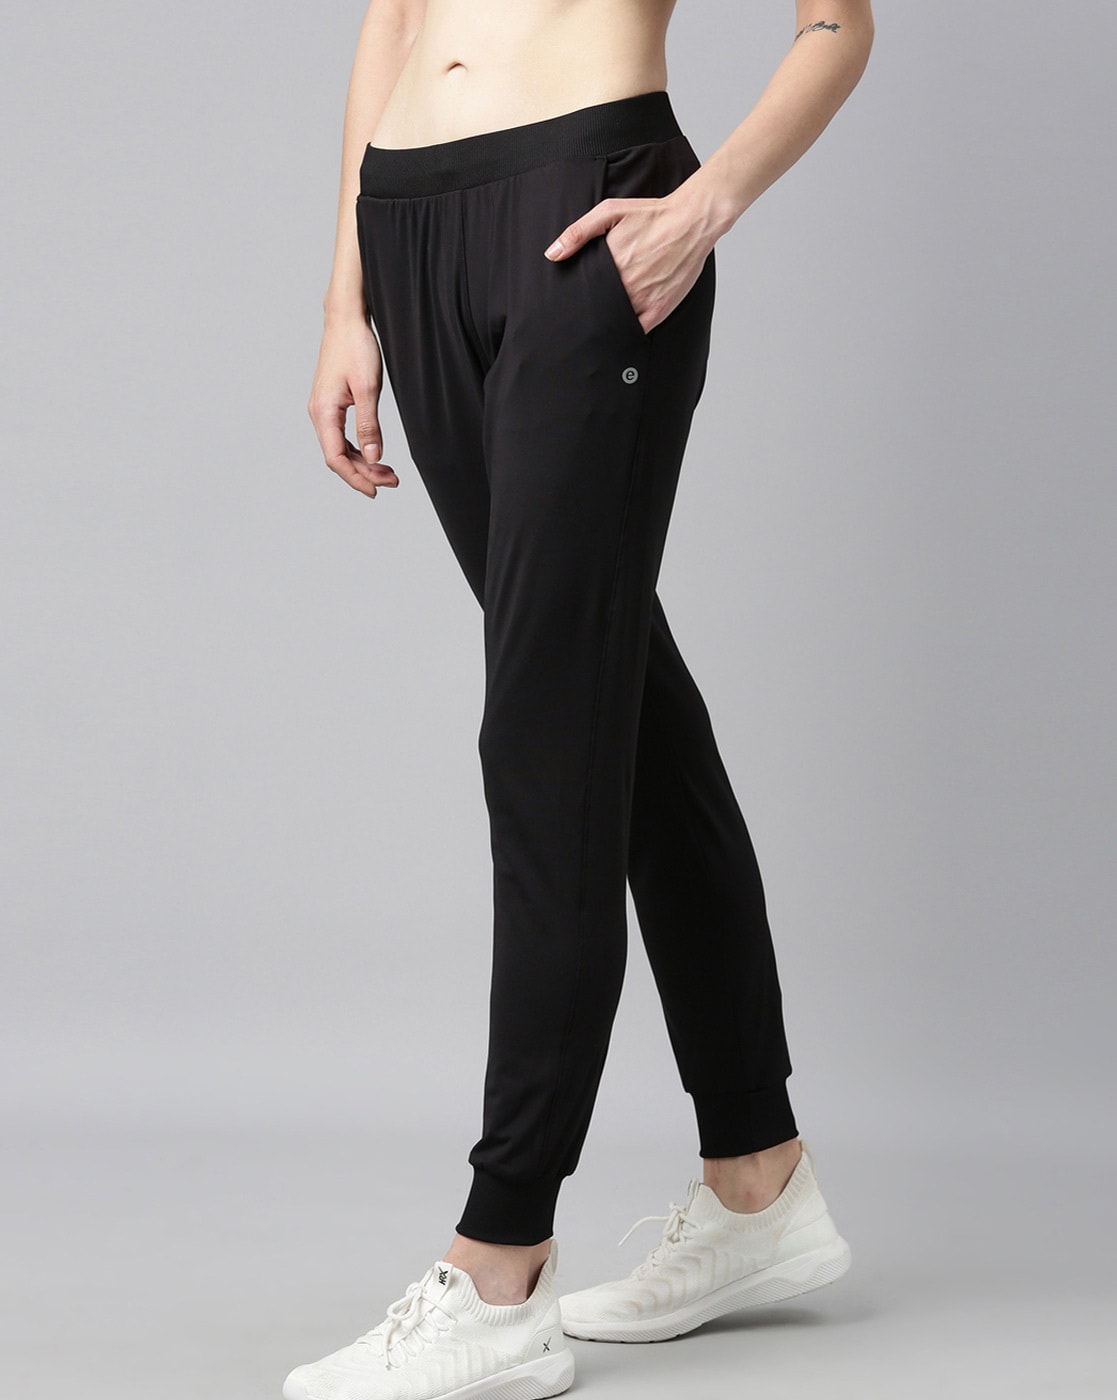 Enamor Women's Relaxed Track Pants : Amazon.in: Clothing & Accessories